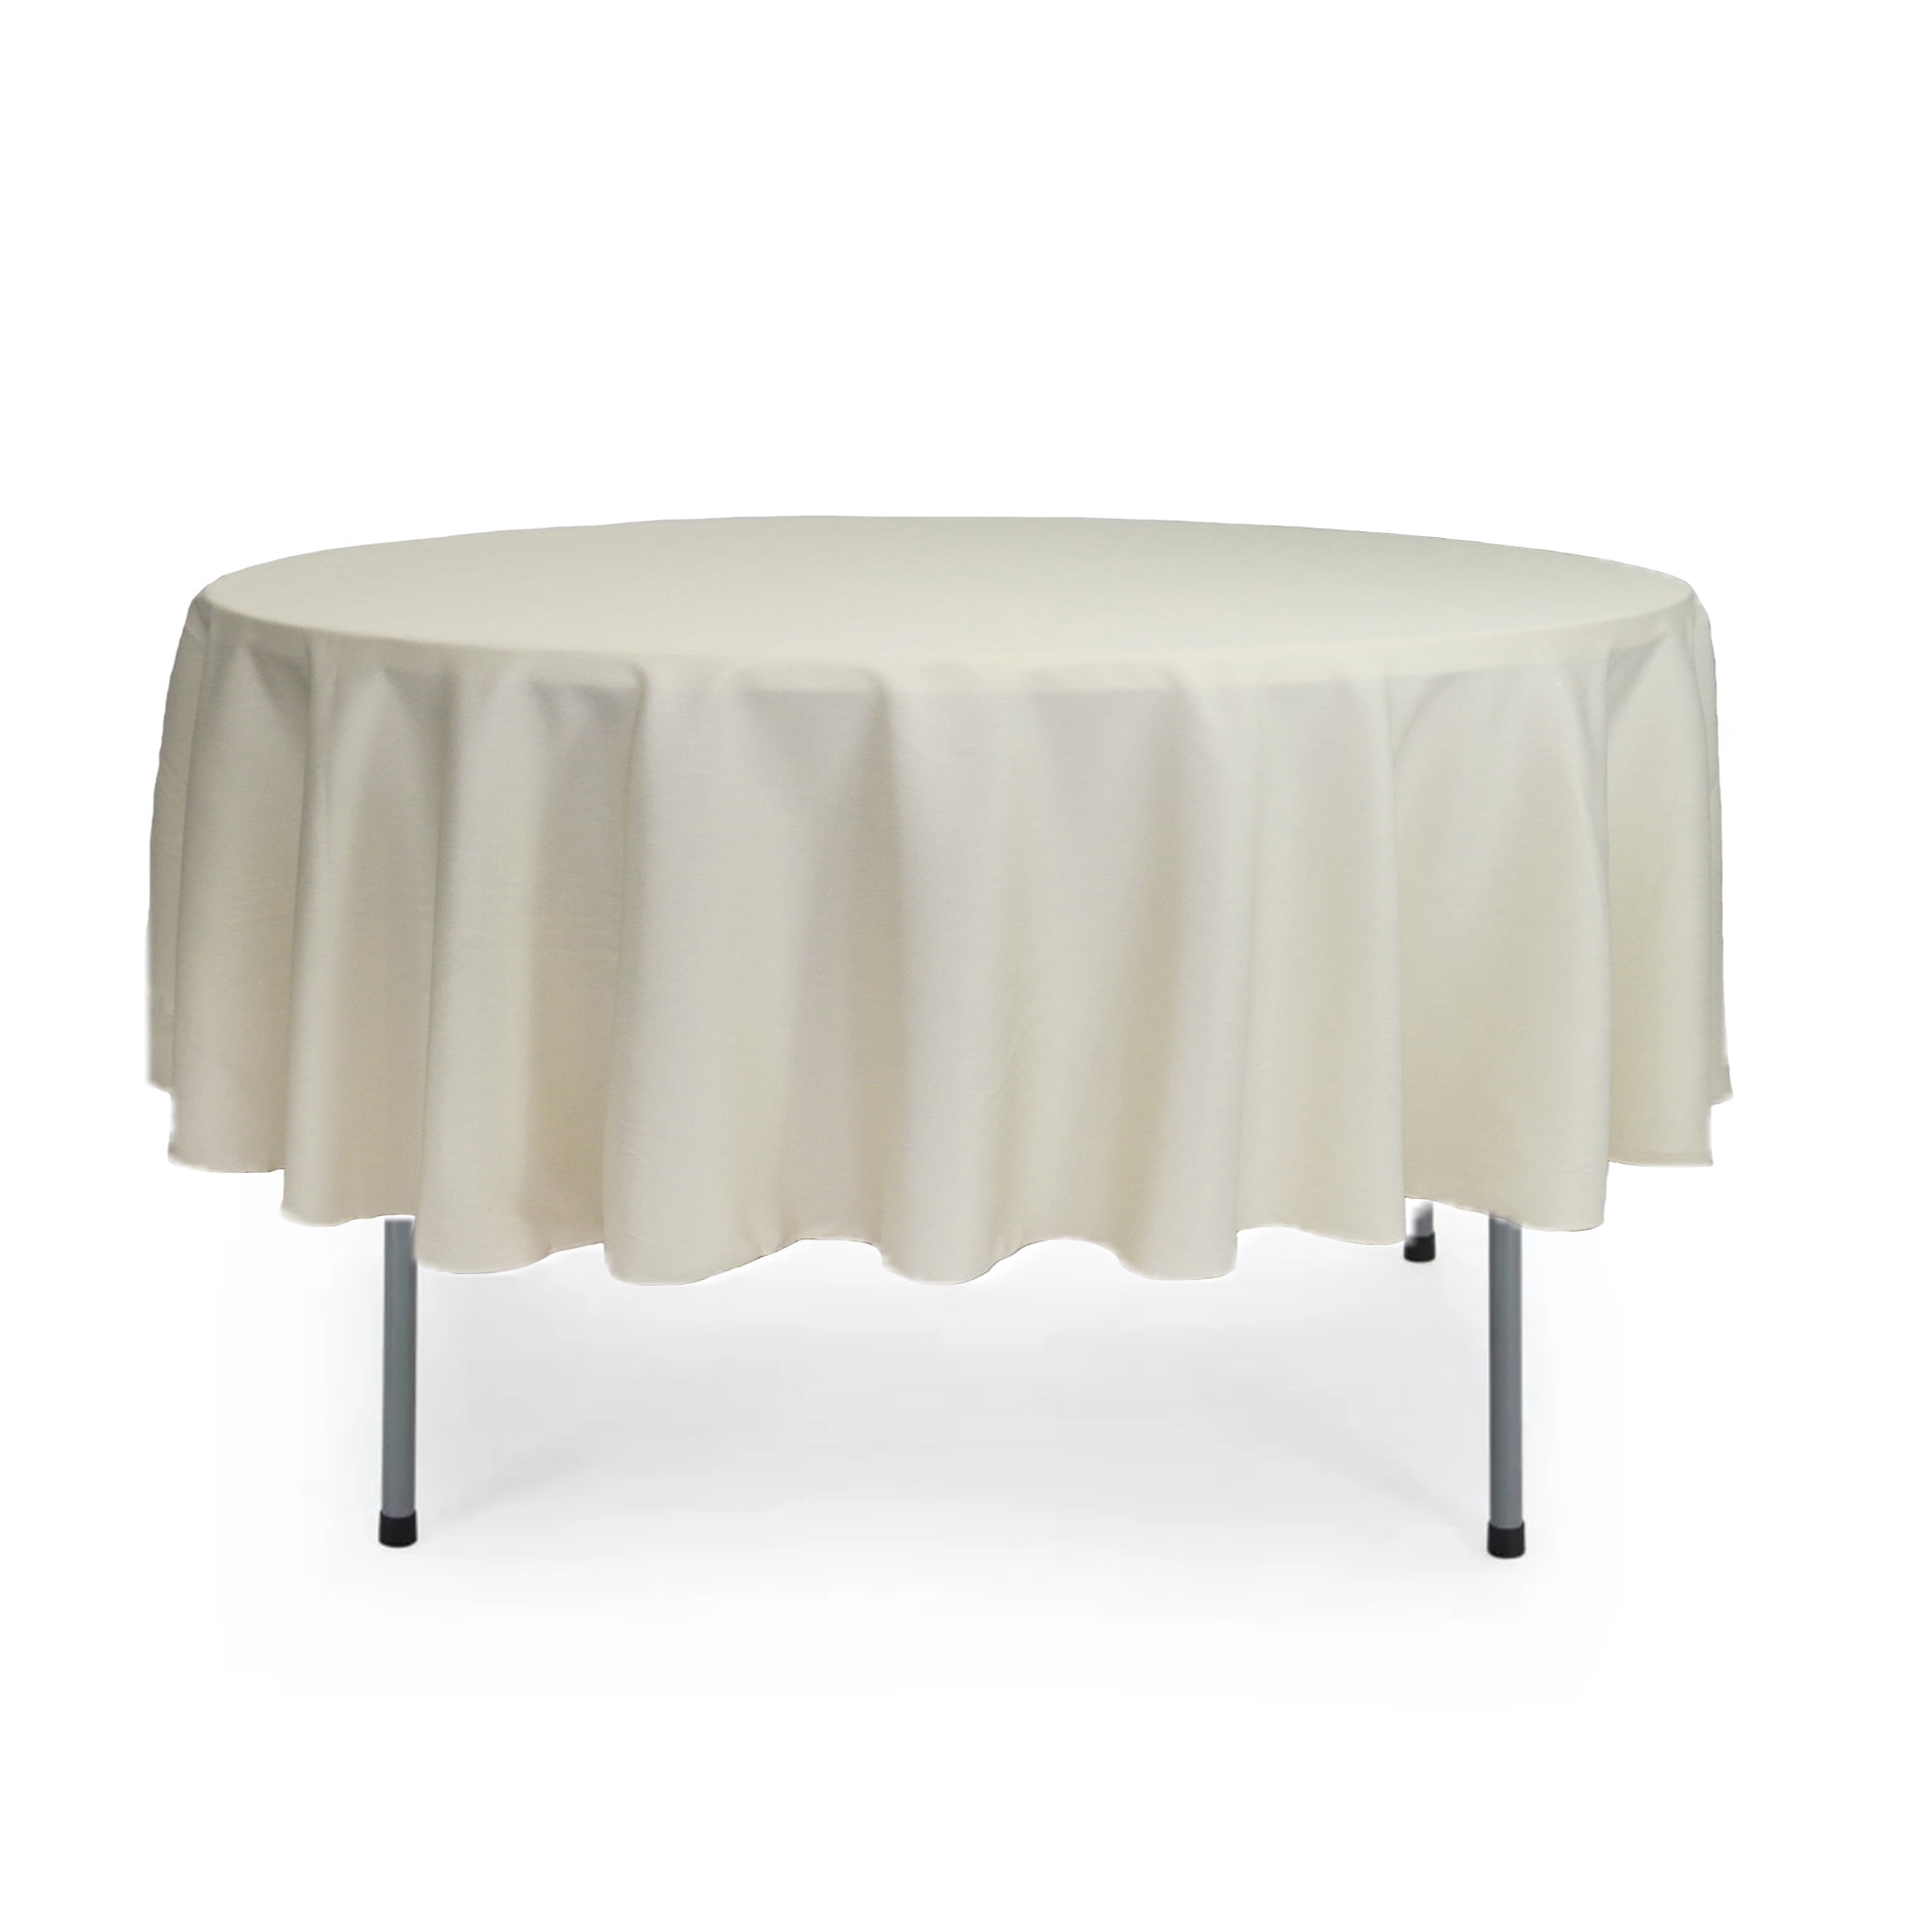 Your Chair Covers 90 Inch Round, How Many Chairs Fit Around A 32 Round Tablecloth